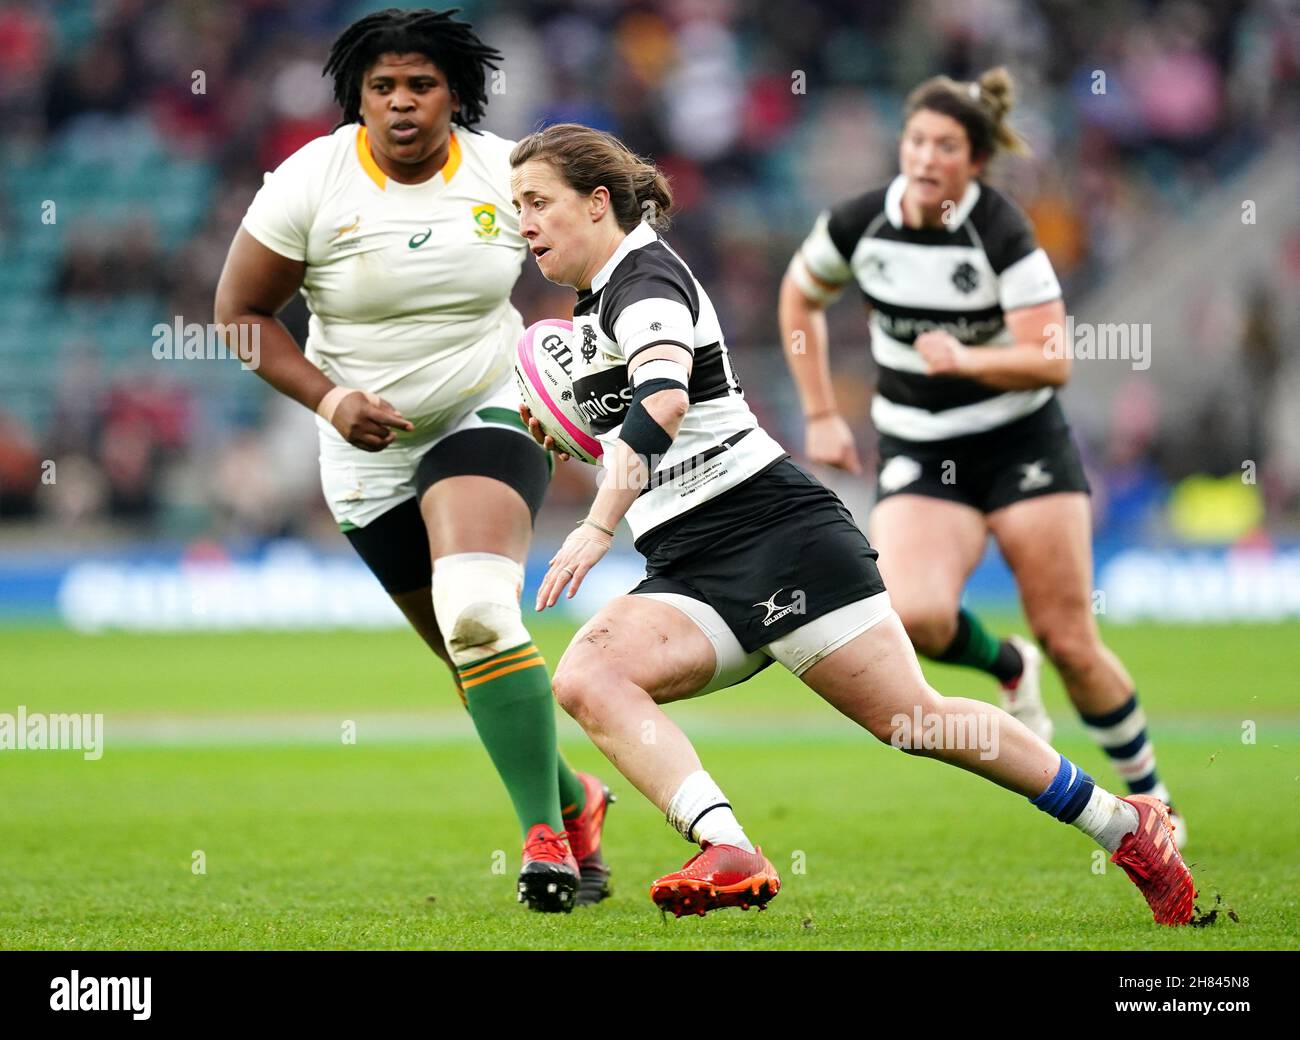 Barbarians' Katy Daley-McLean during the Autumn International match at Twickenham Stadium, London. Picture date: Saturday November 27, 2021. See PA story RUGBYU Barbarian Women. Photo credit should read: David Davies/PA Wire. RESTRICTIONS: Use subject to restrictions. Editorial use only, no commercial use without prior consent from rights holder. Stock Photo